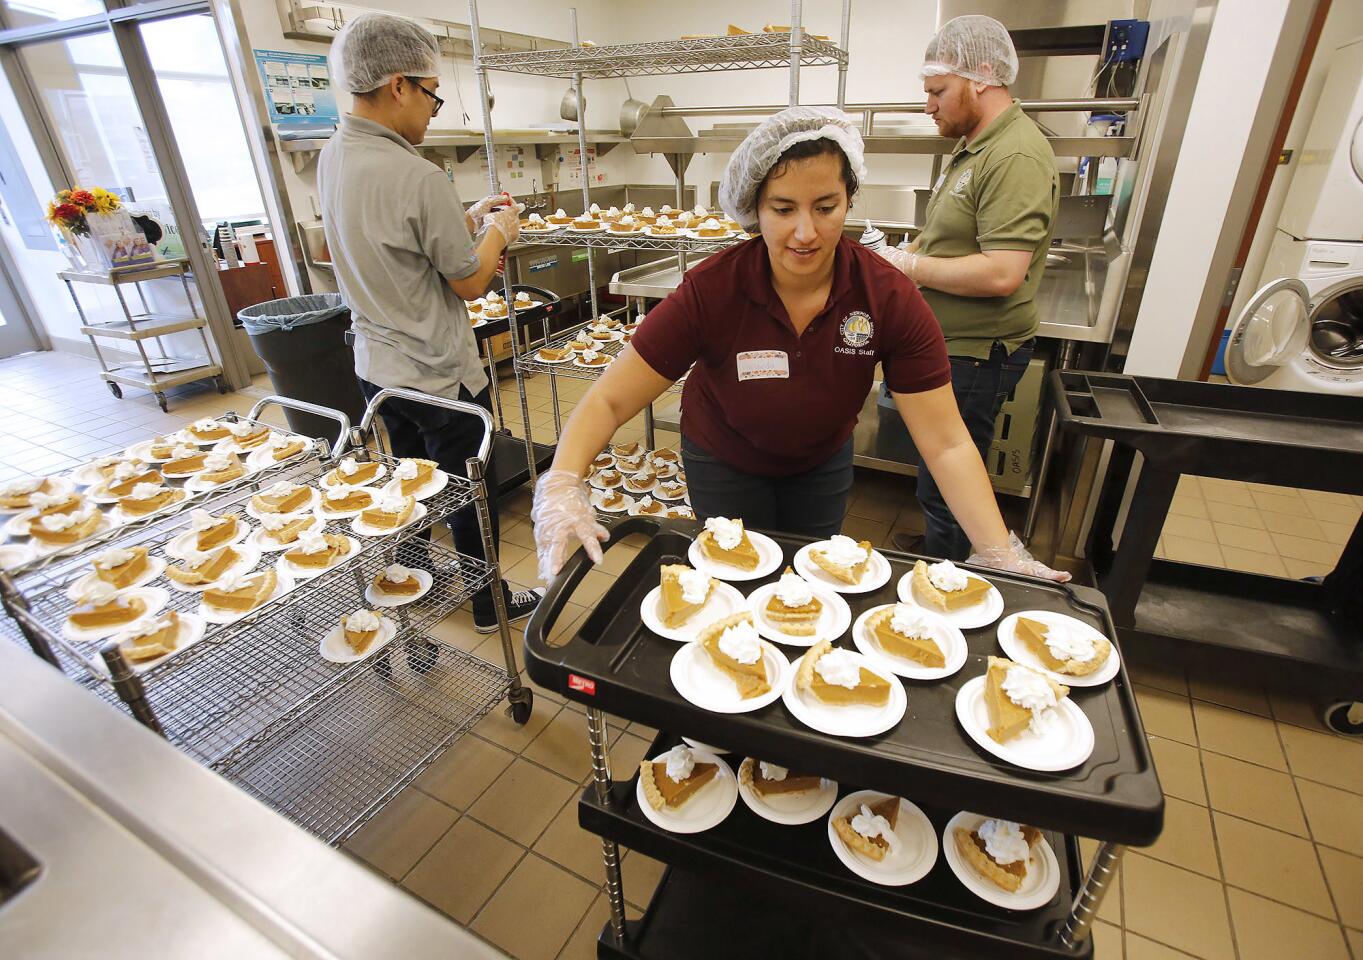 Pumpkin pie is rolled out by staff members of the Newport Beach Recreation & Senior Services Department and the Oasis Senior Center during a Thanksgiving luncheon Wednesday at the center in Corona del Mar.